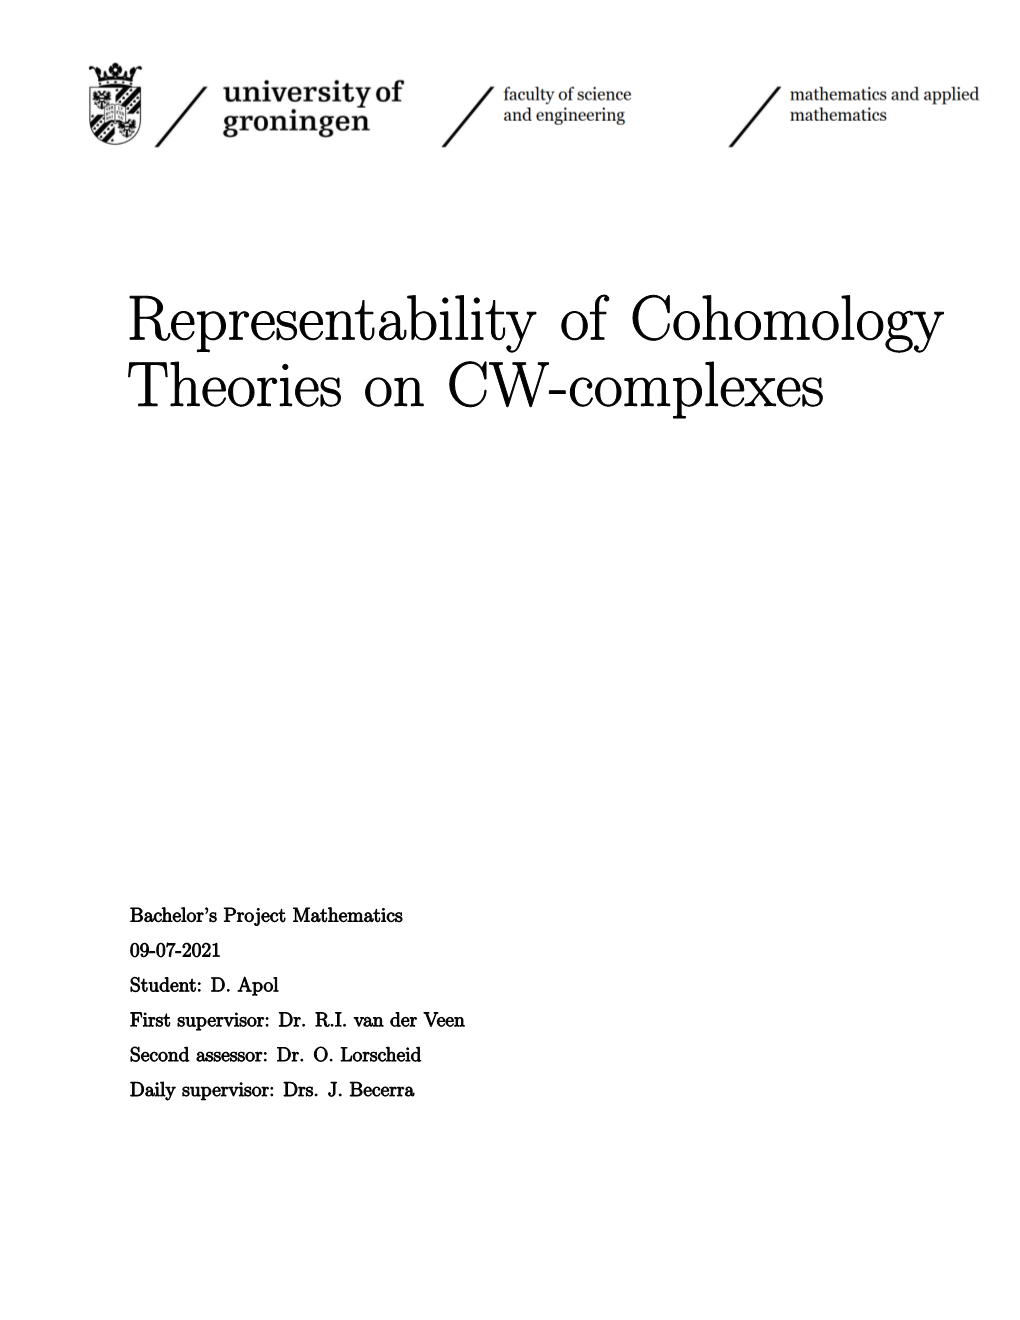 Representability of Cohomology Theories on CW-Complexes